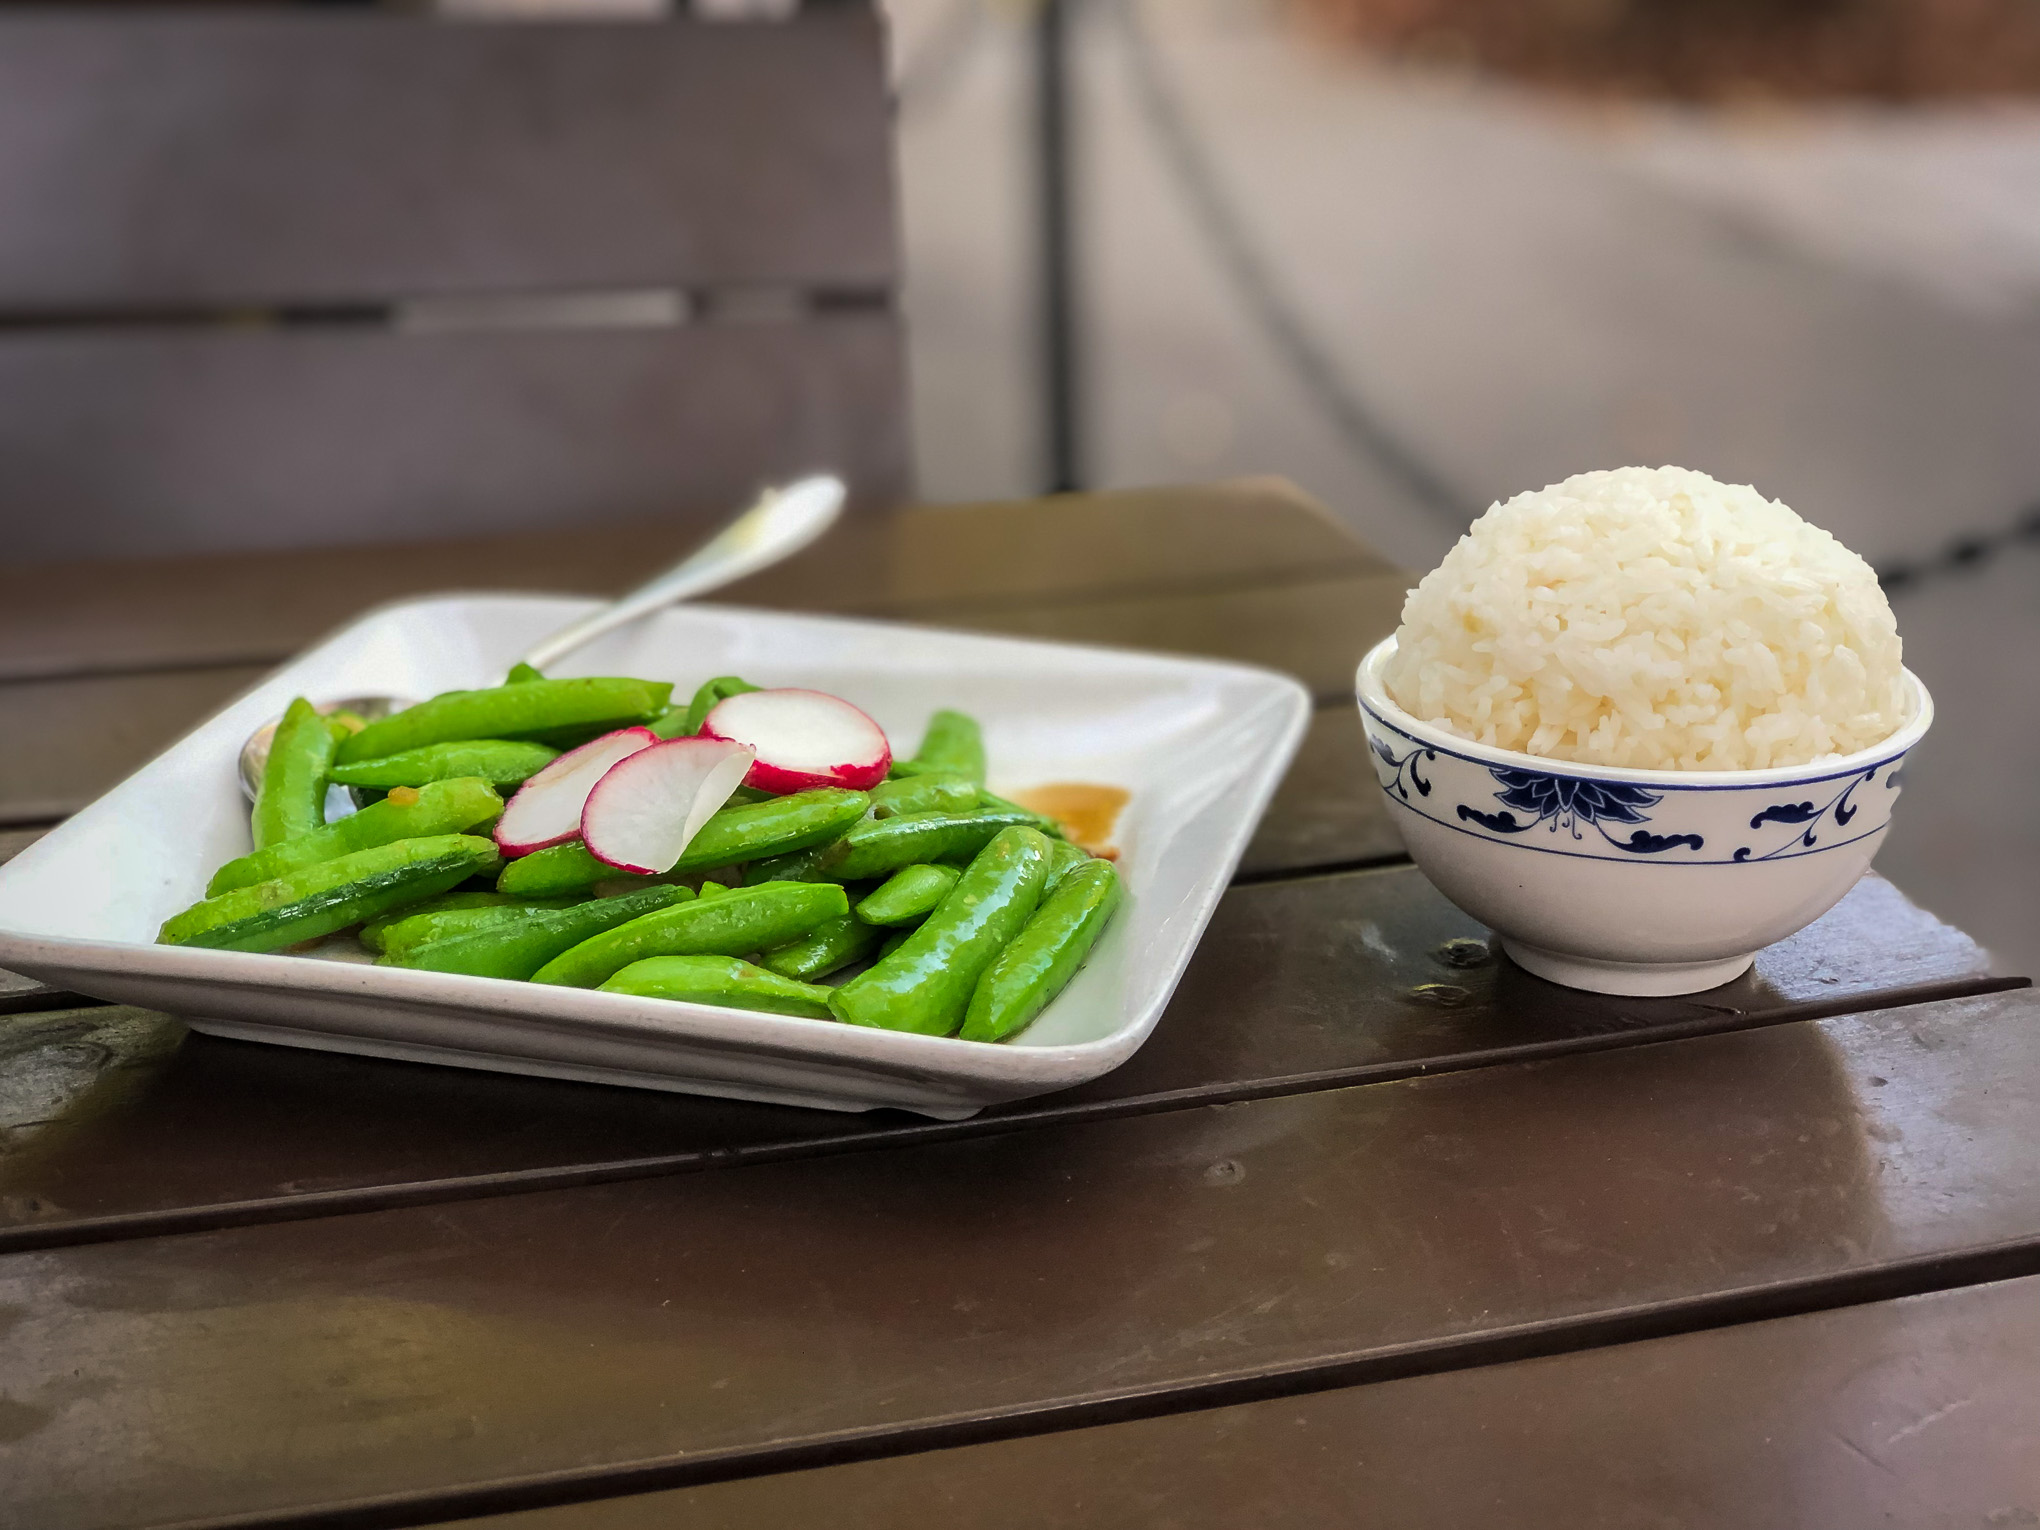 Plate of snap peas and a bowl of white rice